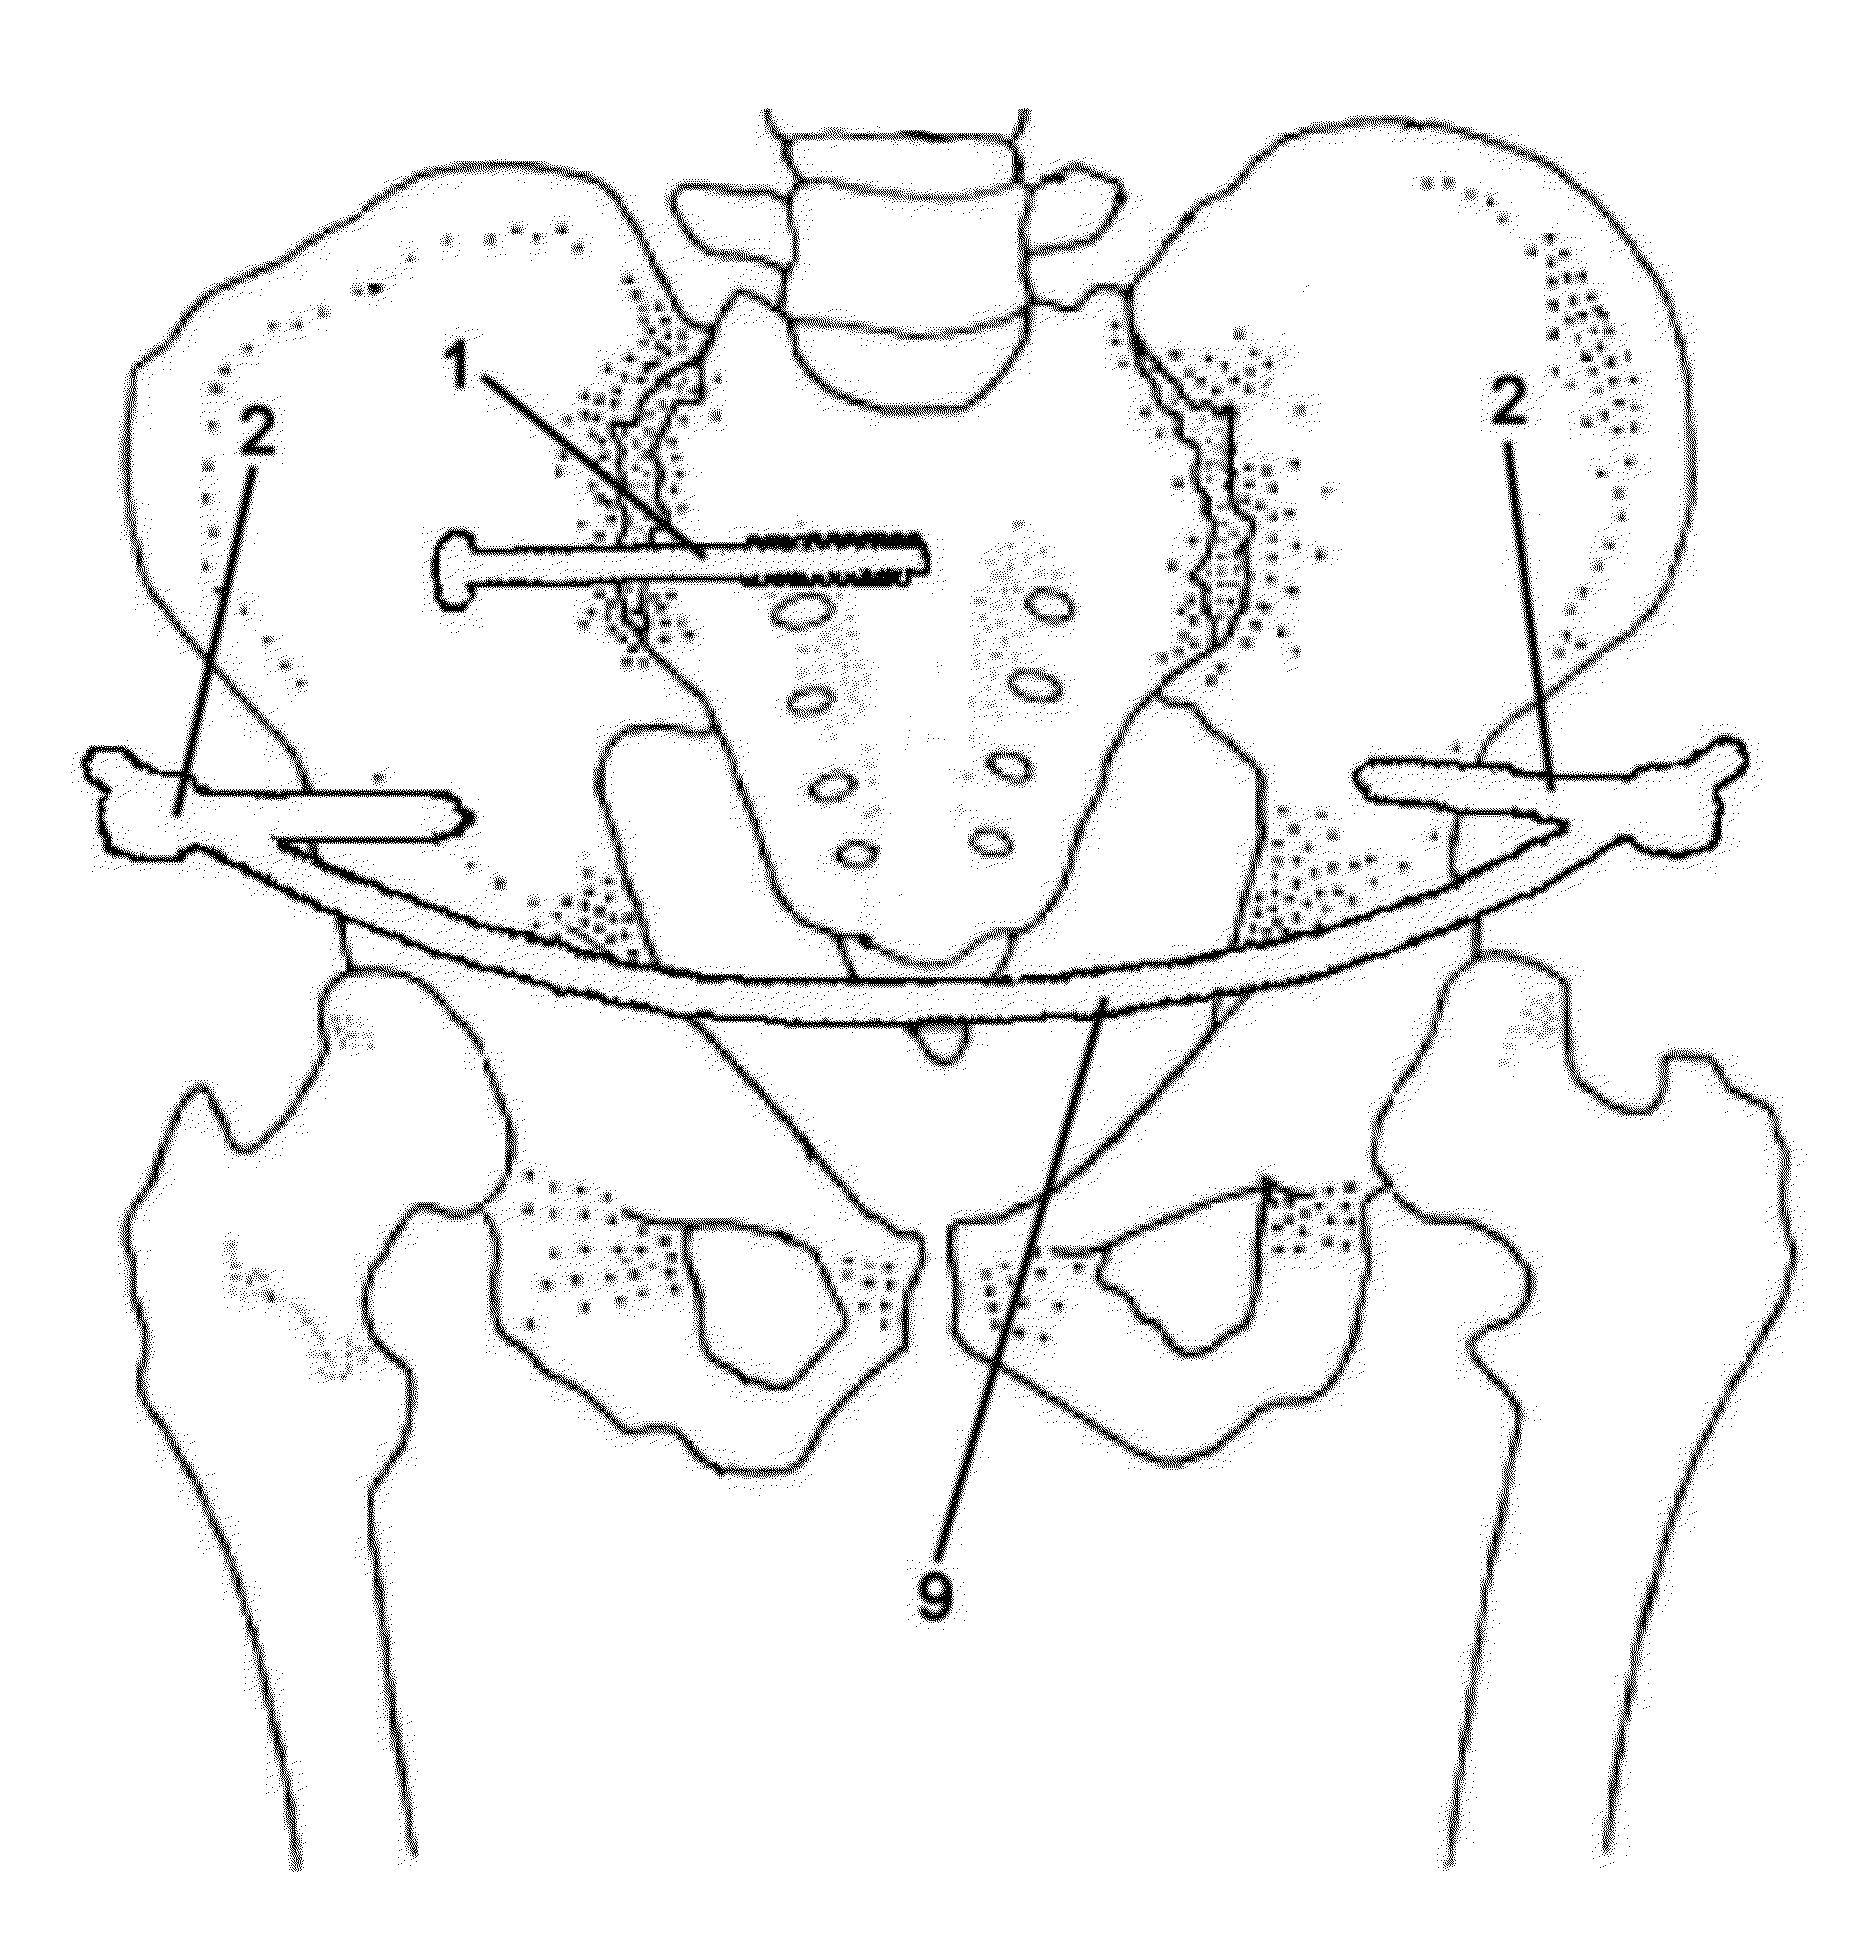 Method for Minimally Invasive Treatment of Unstable Pelvic Ring Injuries